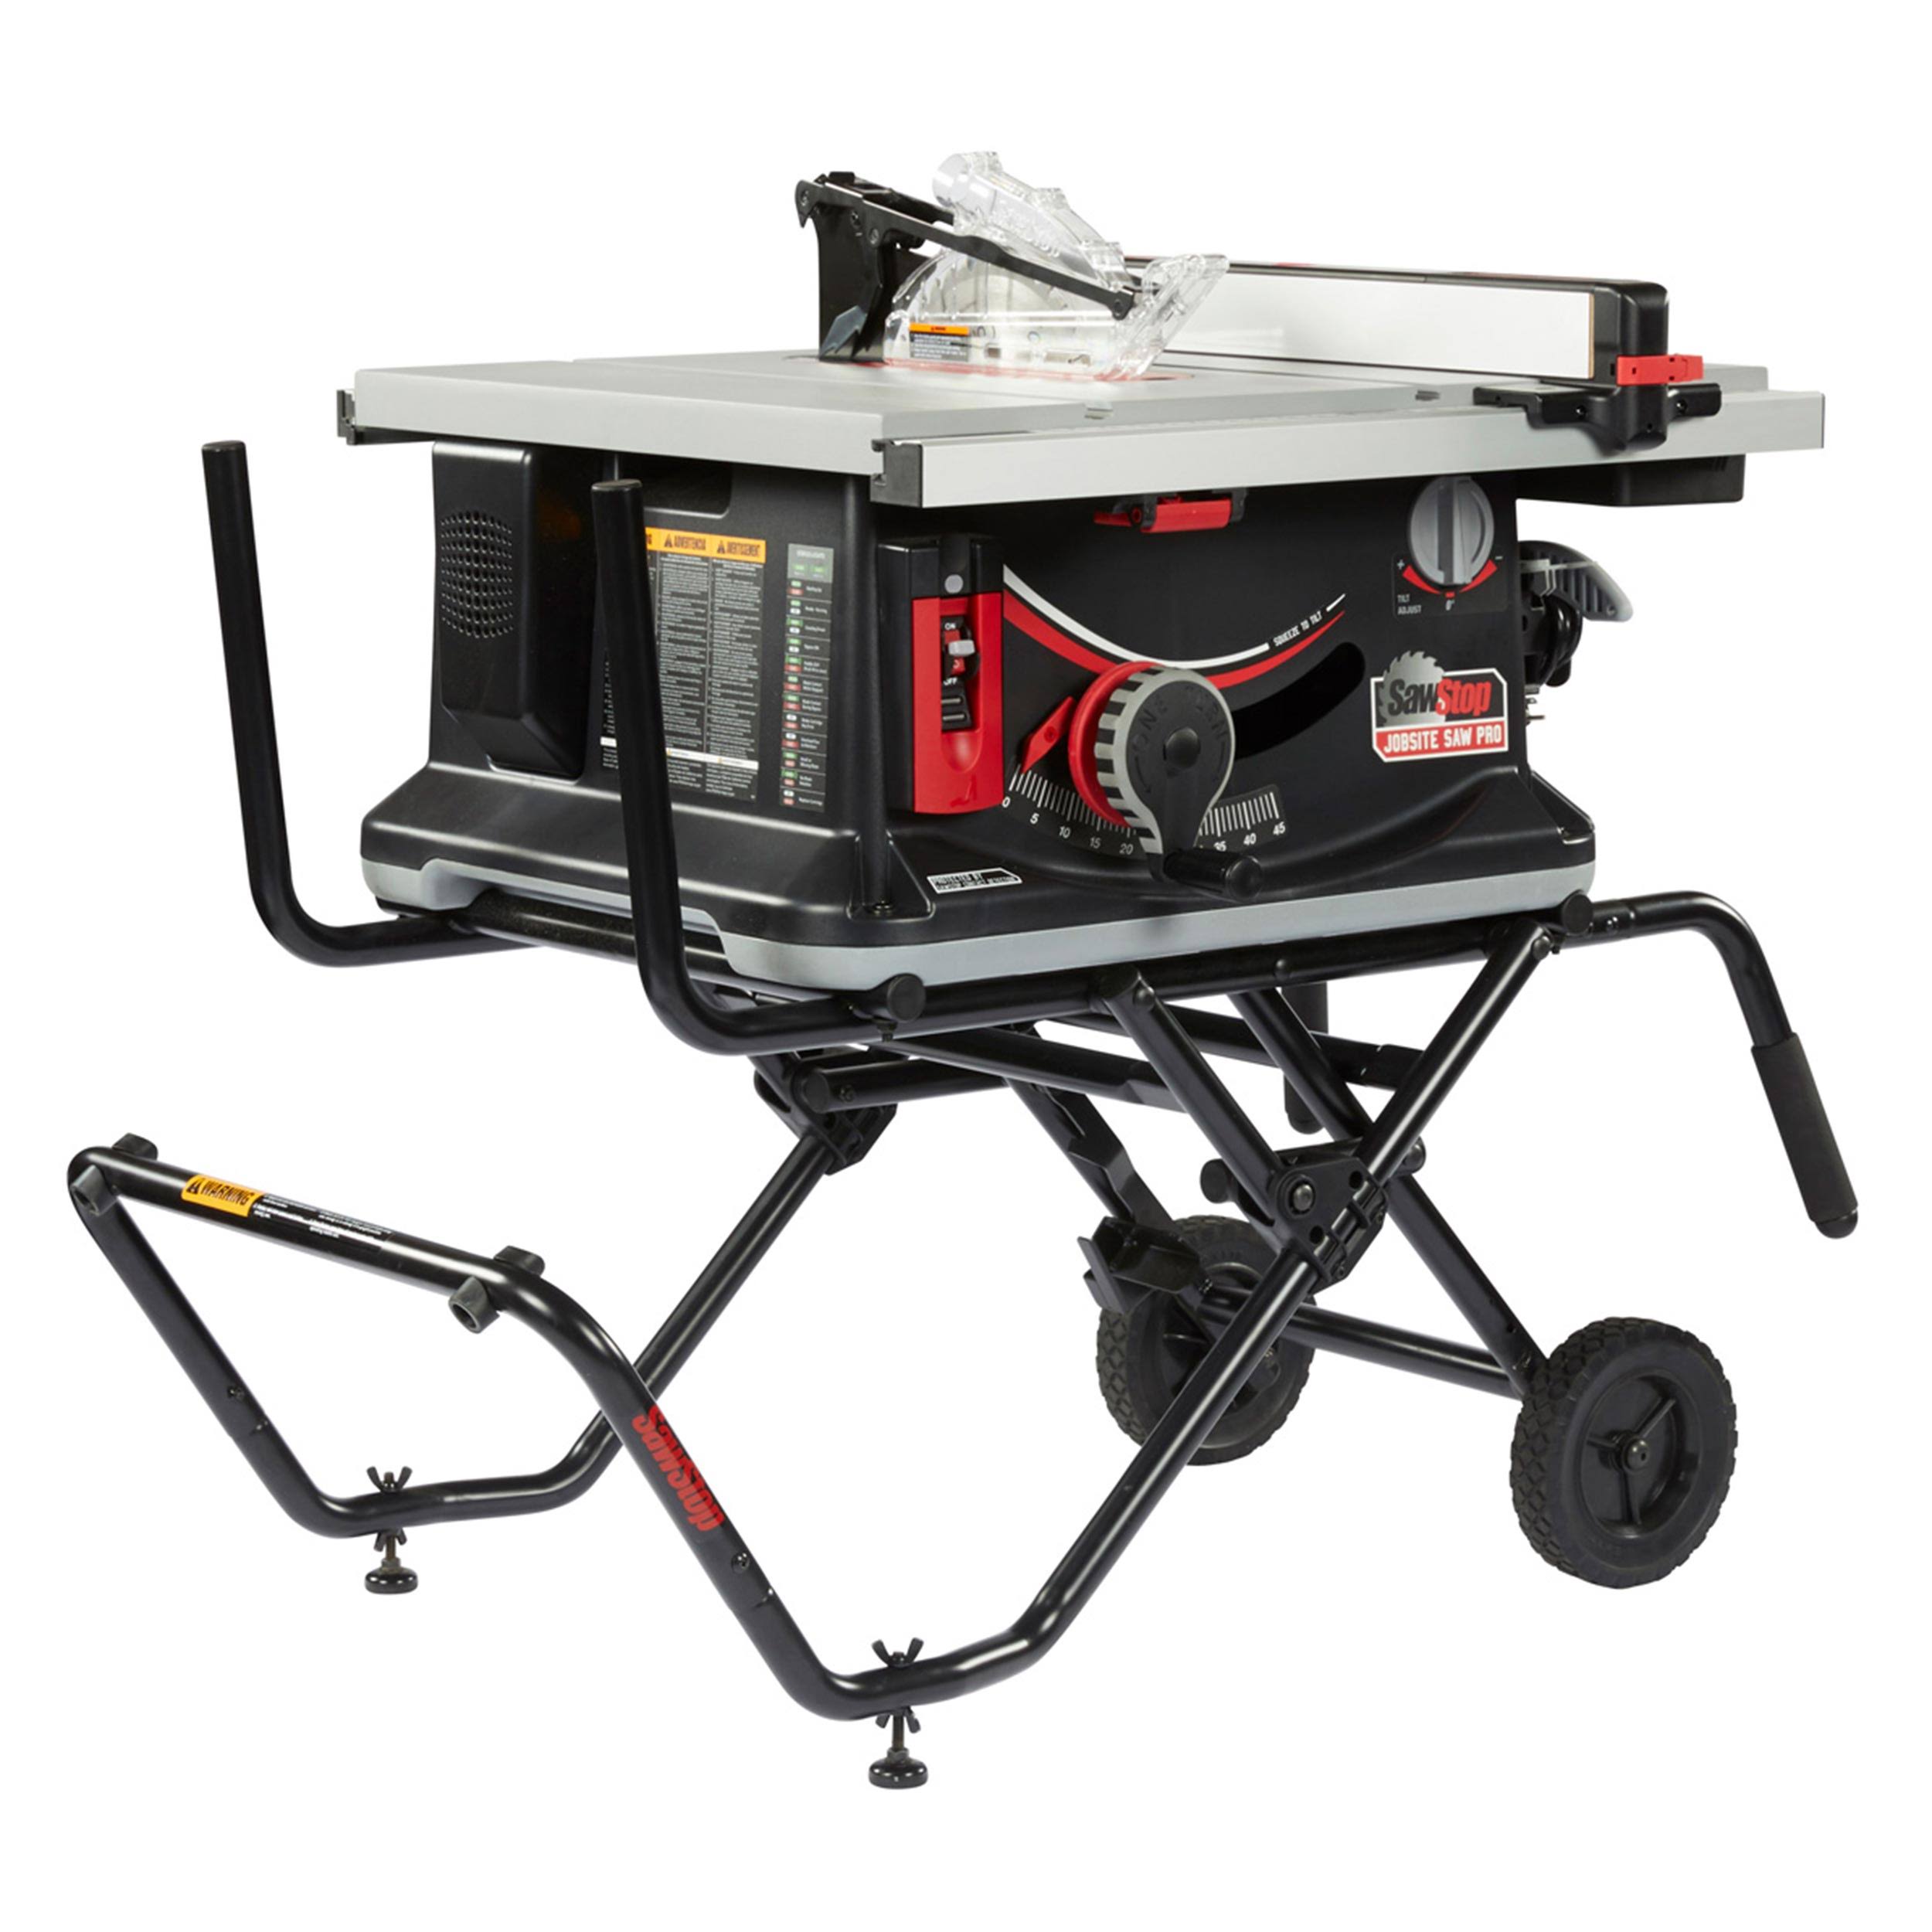 SawStop JSS-120A60 120V, 15A,60Hz Jobsite Saw Pro with Mobile Cart Assembly